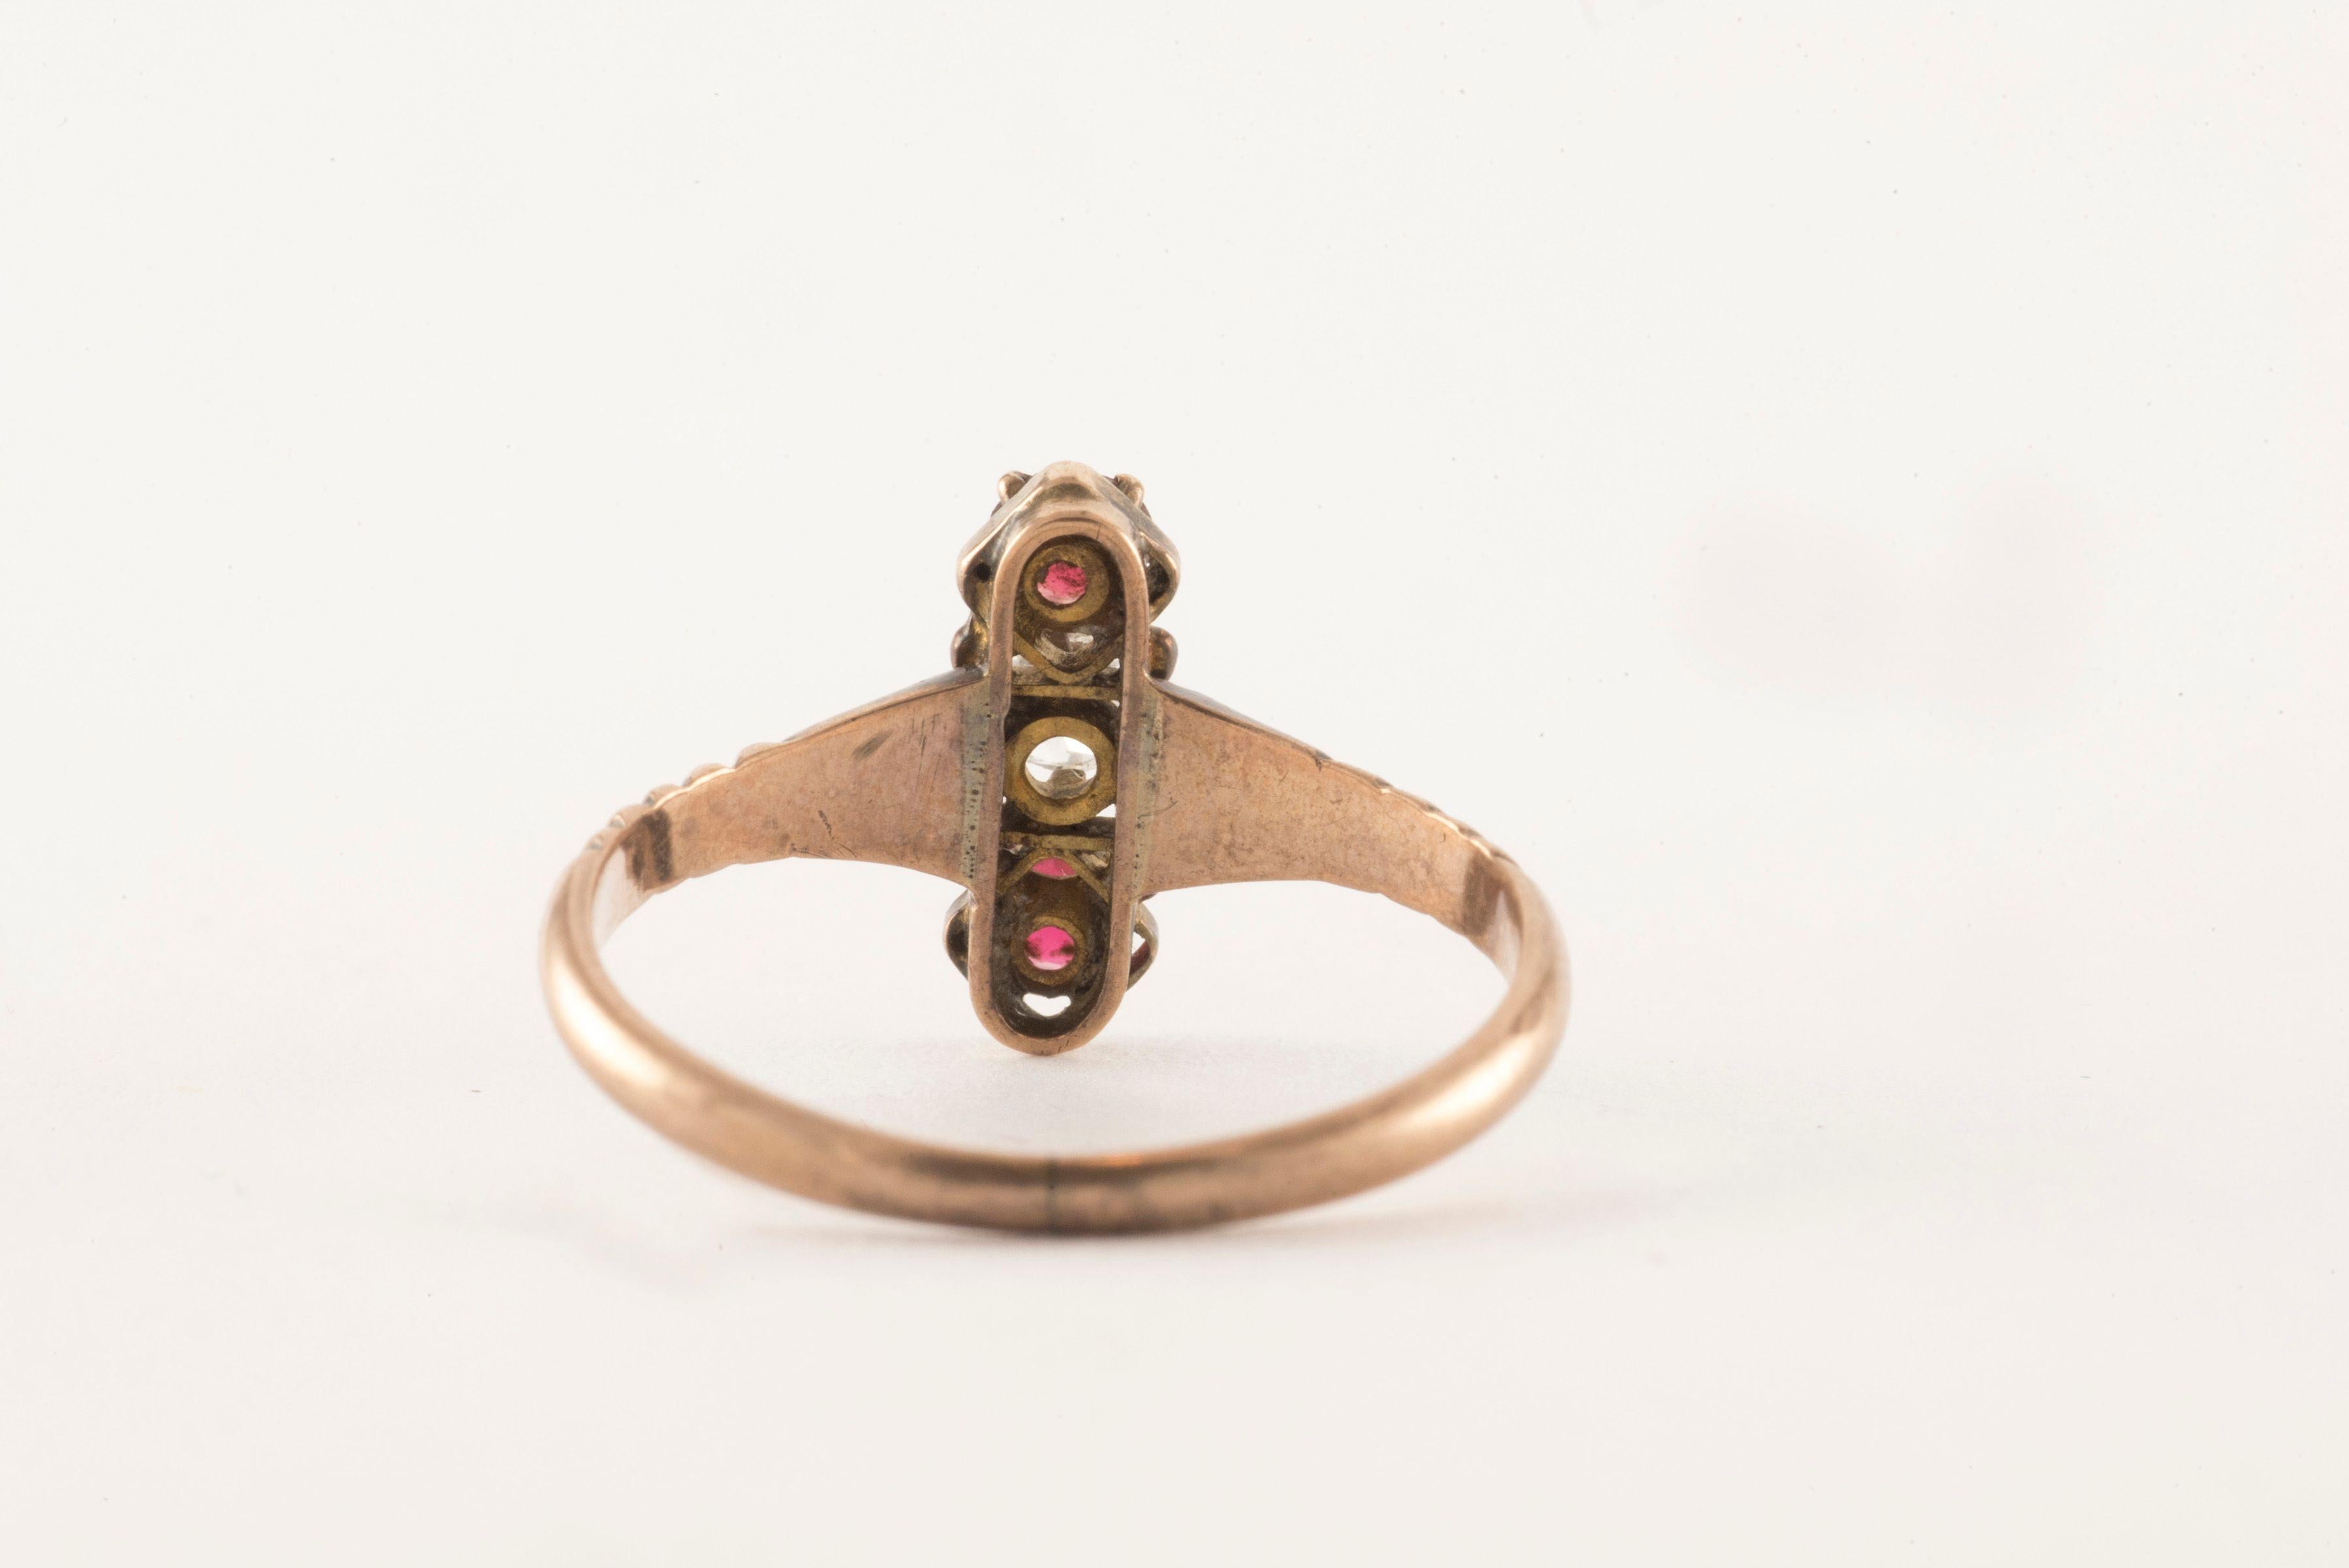 An Old Mine cushion cut diamond measuring approximately 0.15 carats, H color, VS clarity, sits at the center of this three-ring band fashioned from 10kt rose gold and accented by two round-shaped red garnets. The vertical orientation of this ring is